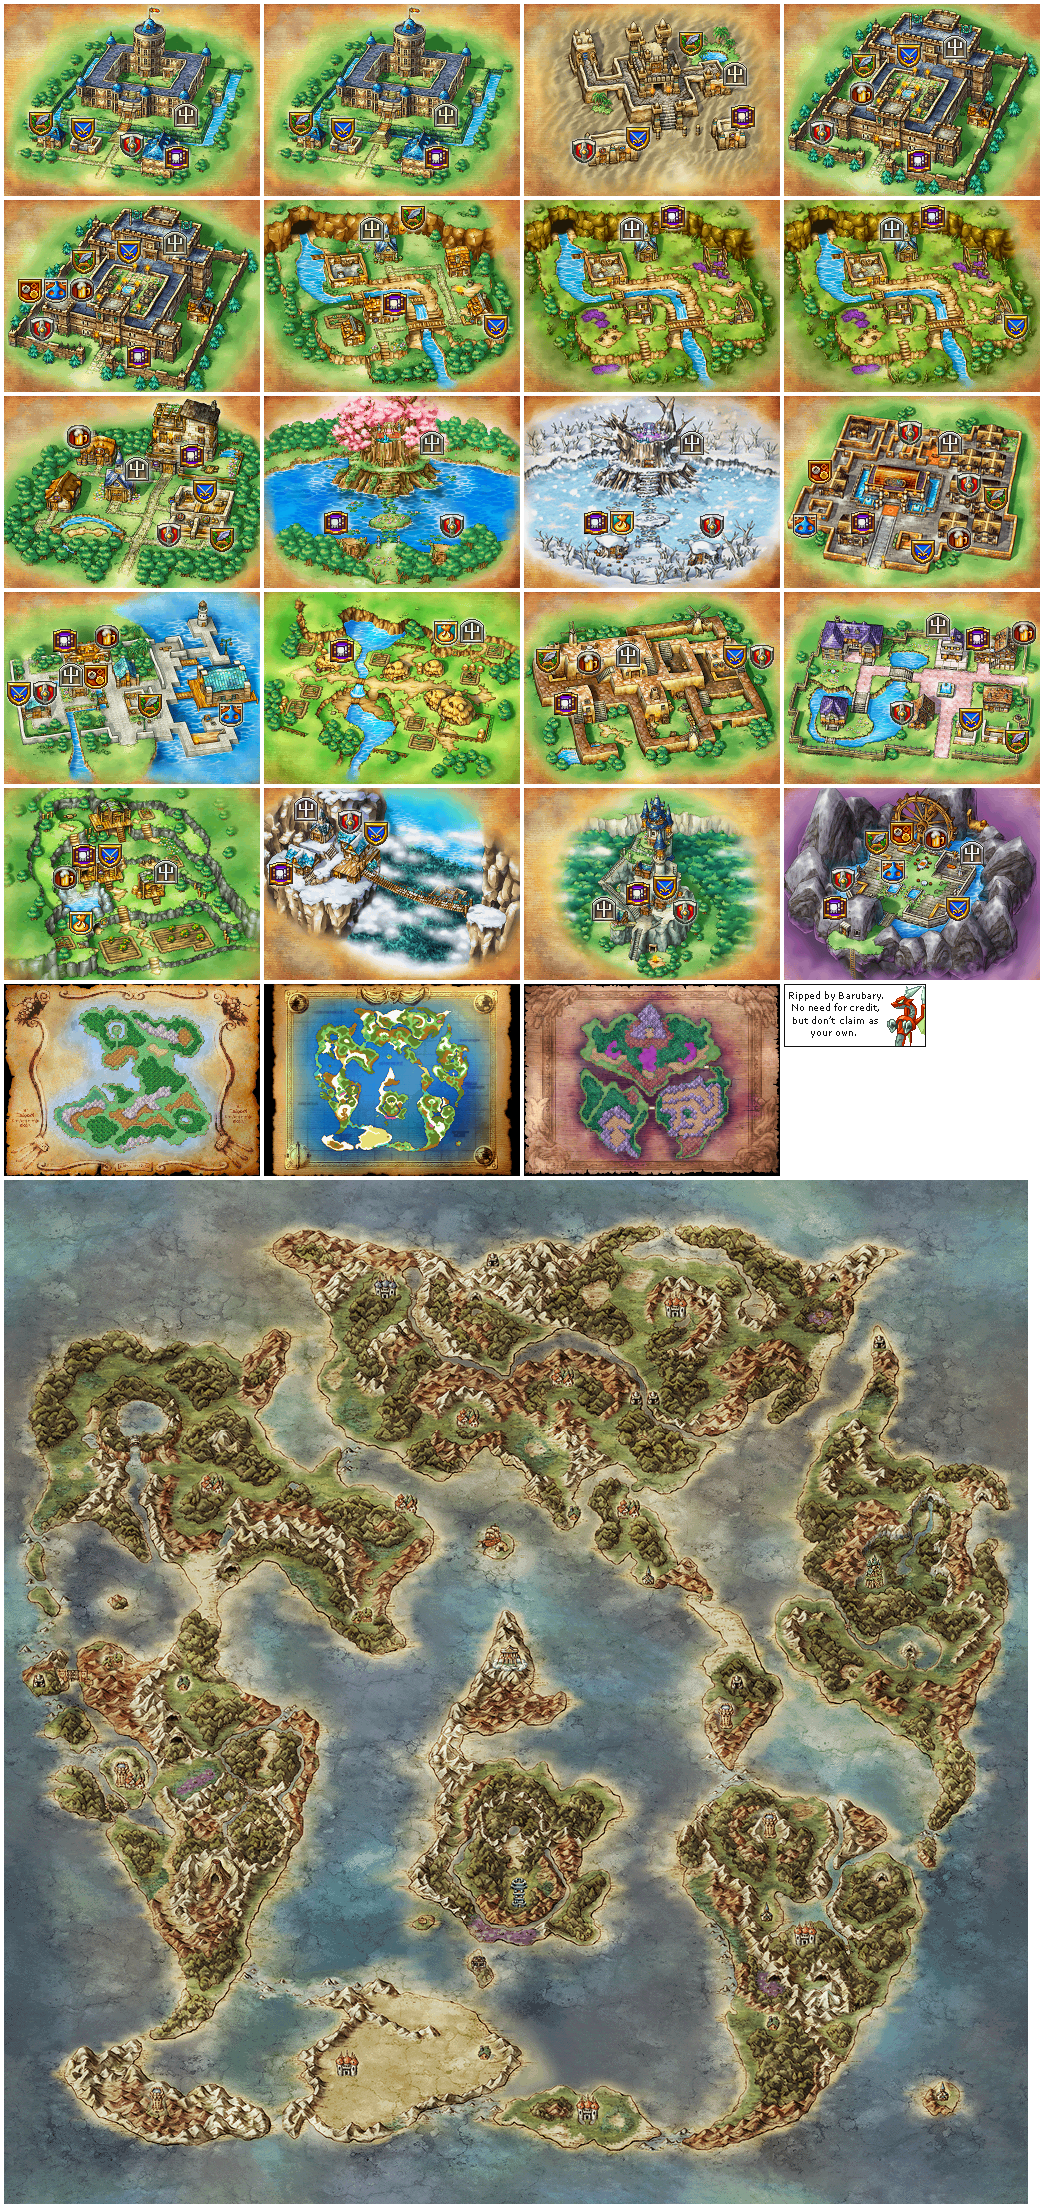 dq9 map of resources